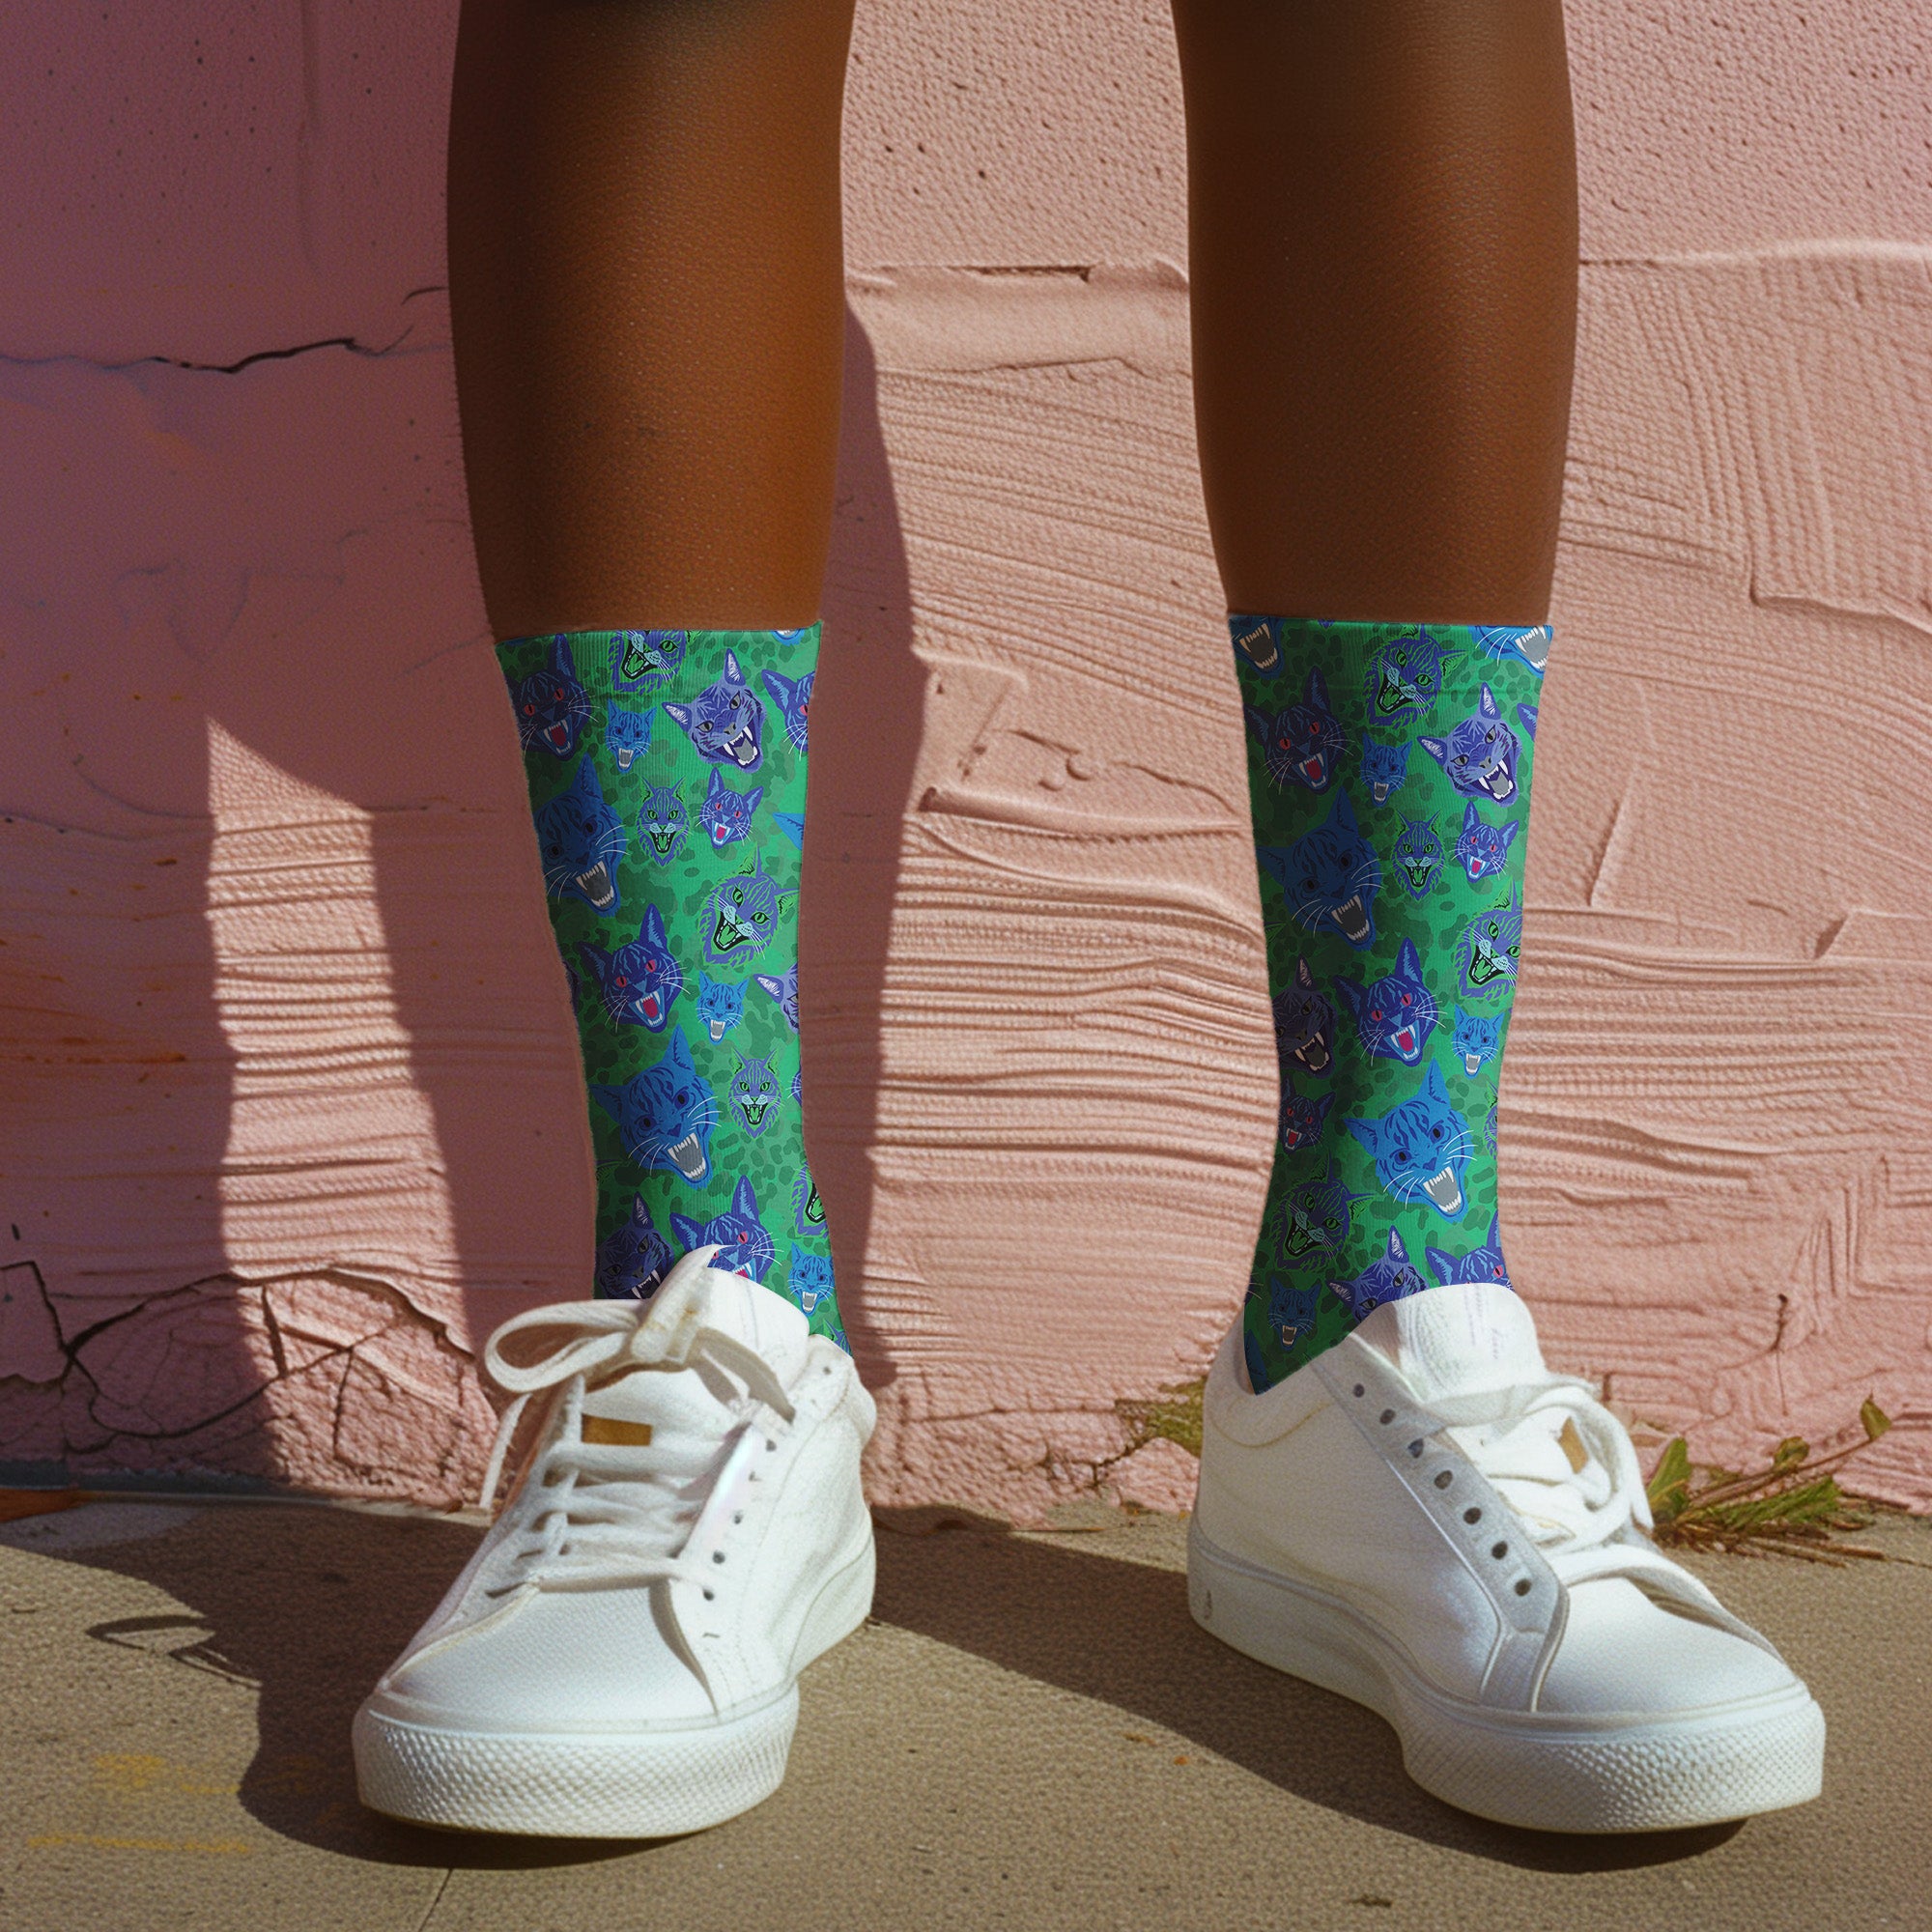 un and playful socks adorned with vibrant tiger head motifs on a green background, with black heels and toes, ideal for animal lovers and those who enjoy unique designs